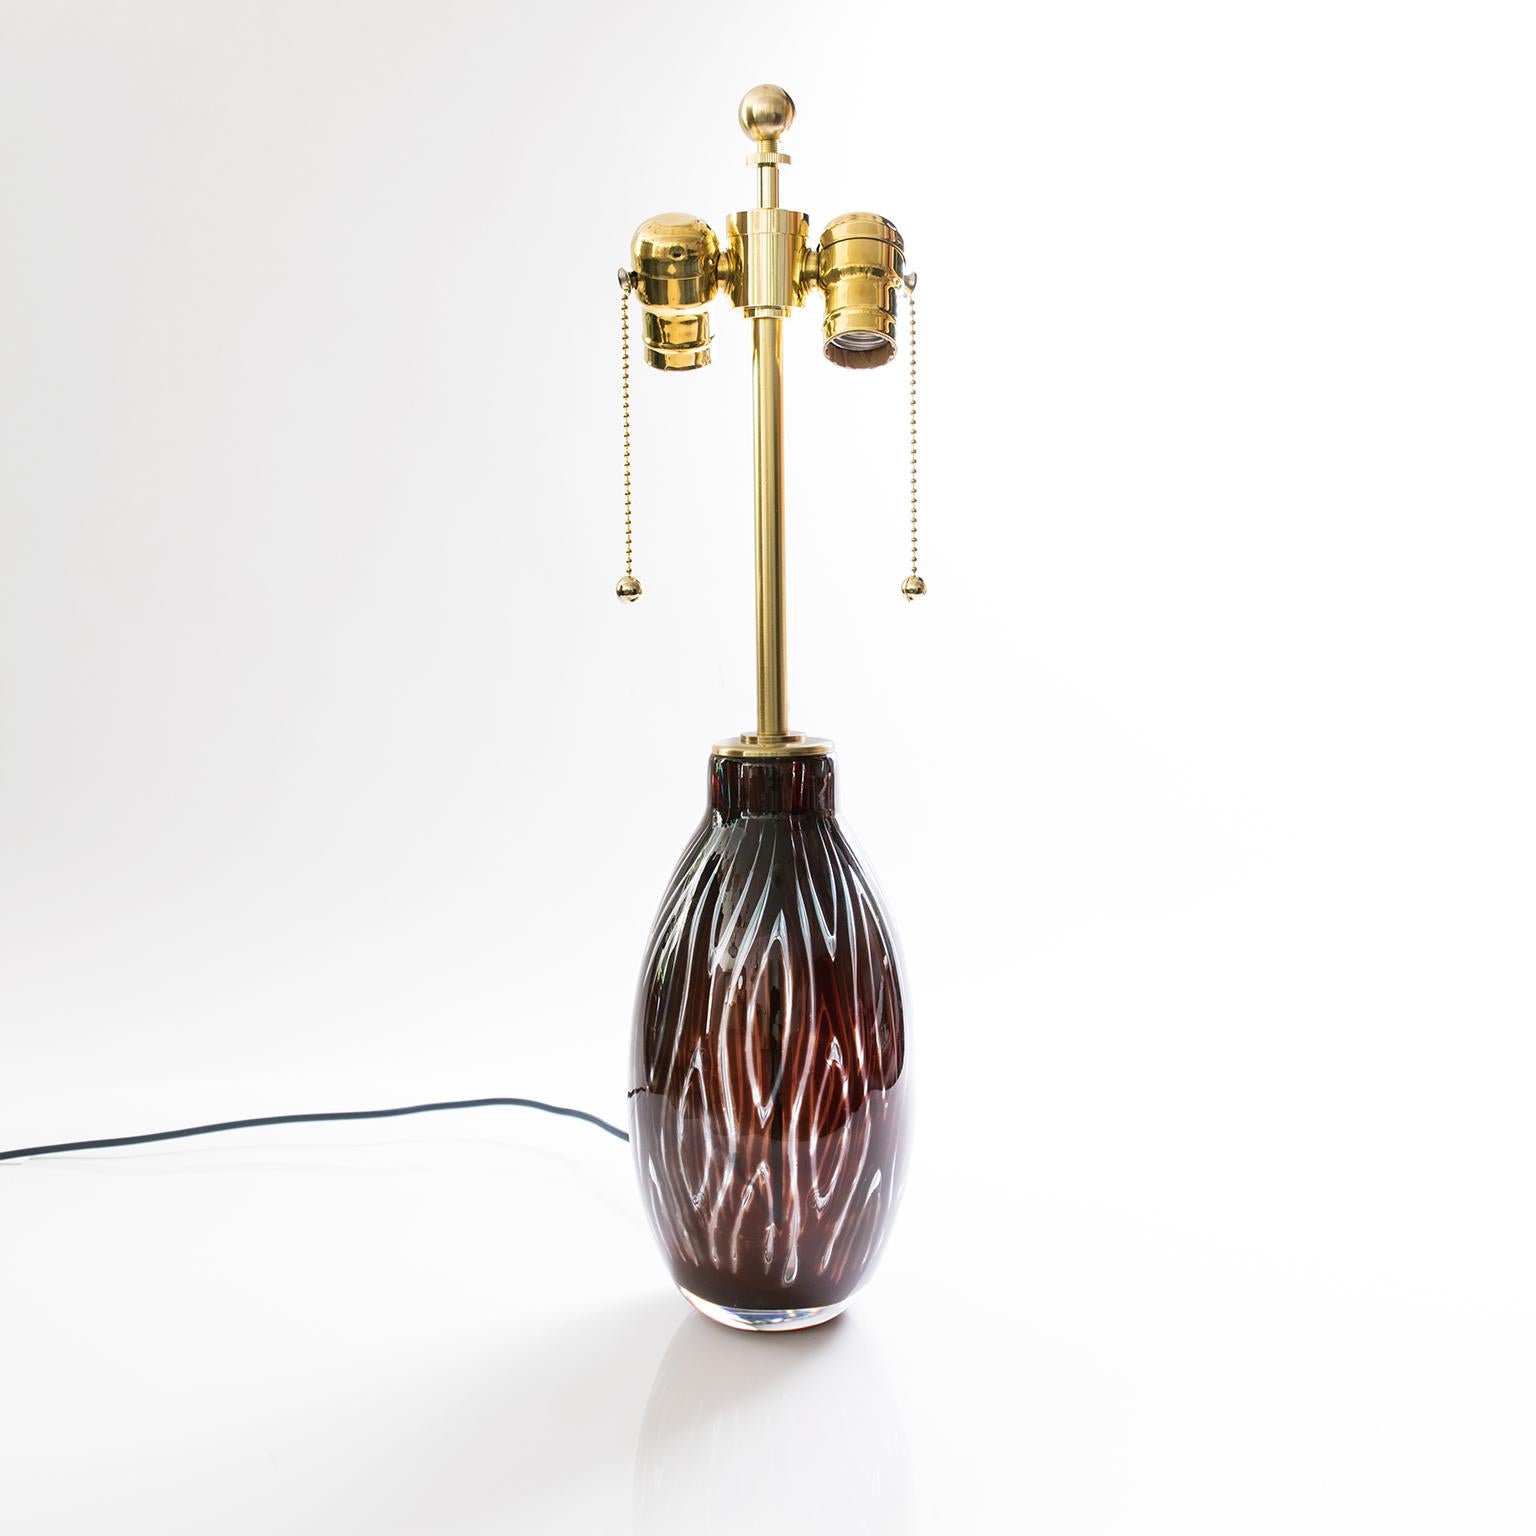 Polished Scandinavian Modern Glass Table Lamp by Edvin Ohrstrom for Orrefors, 1958 For Sale